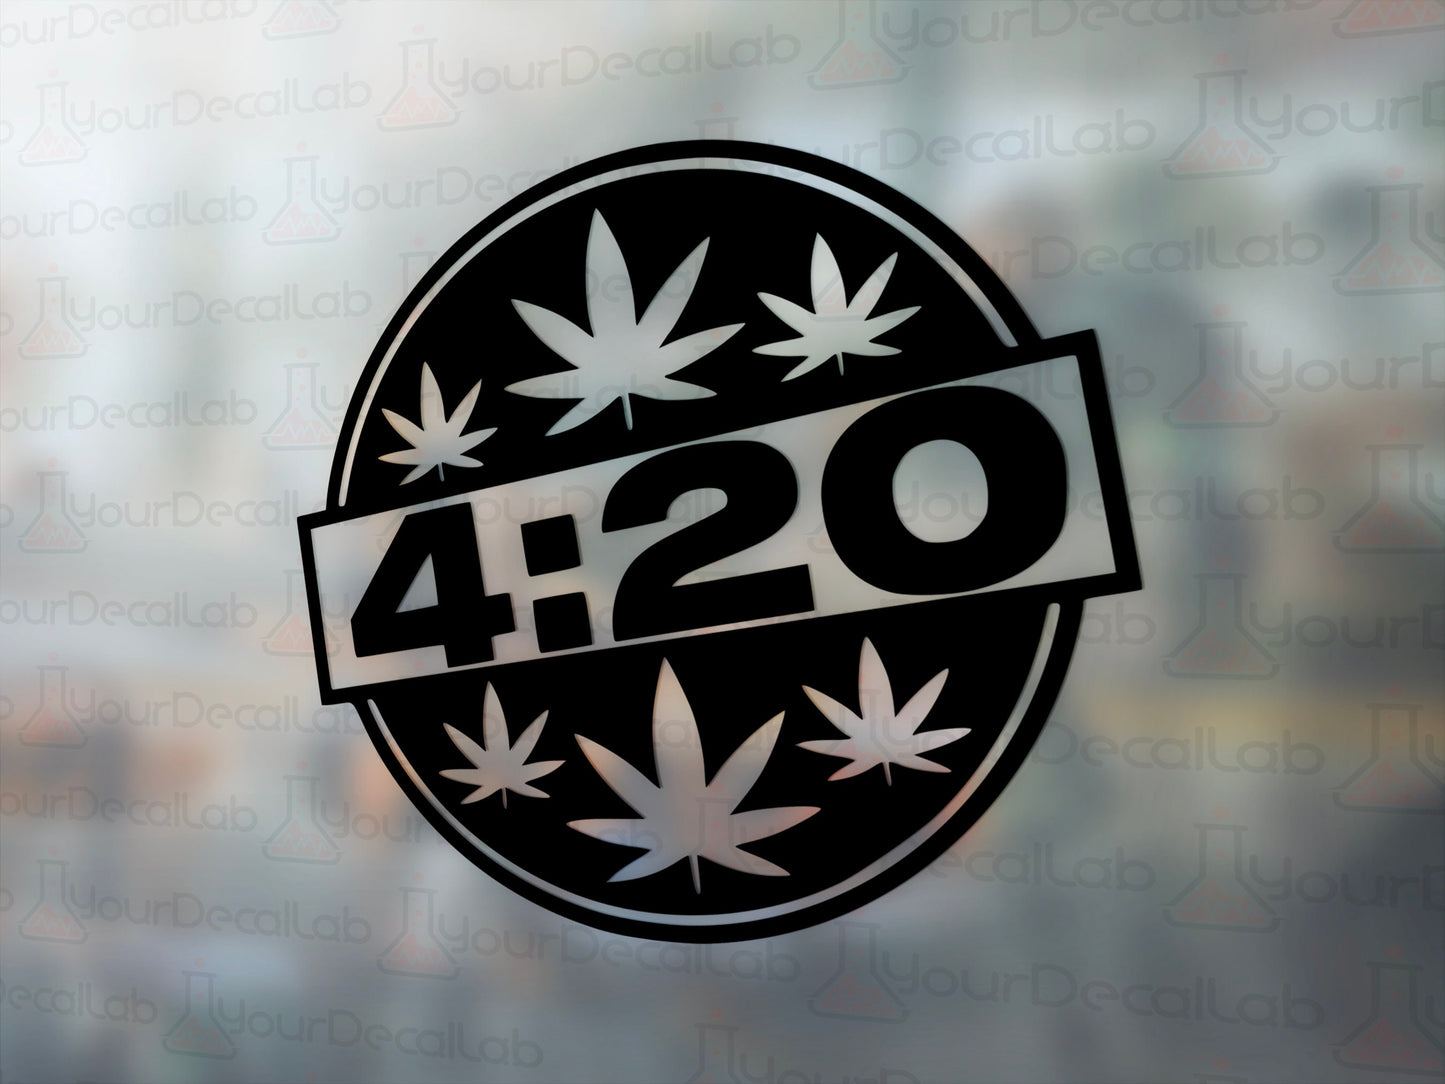 420 Decal - Many Colors & Sizes